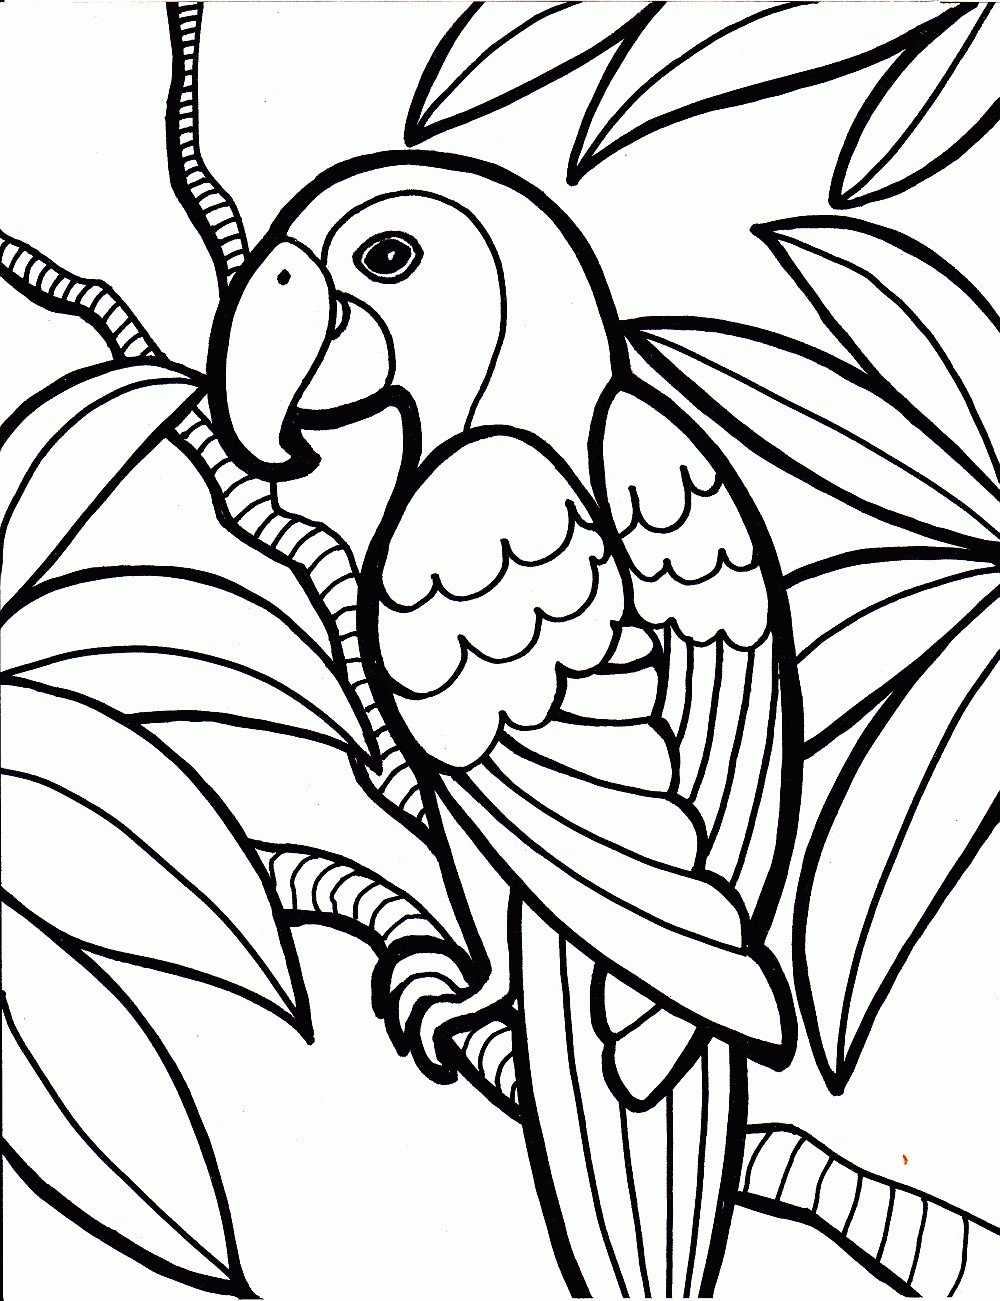  Free Printable Coloring Pages Kids 9